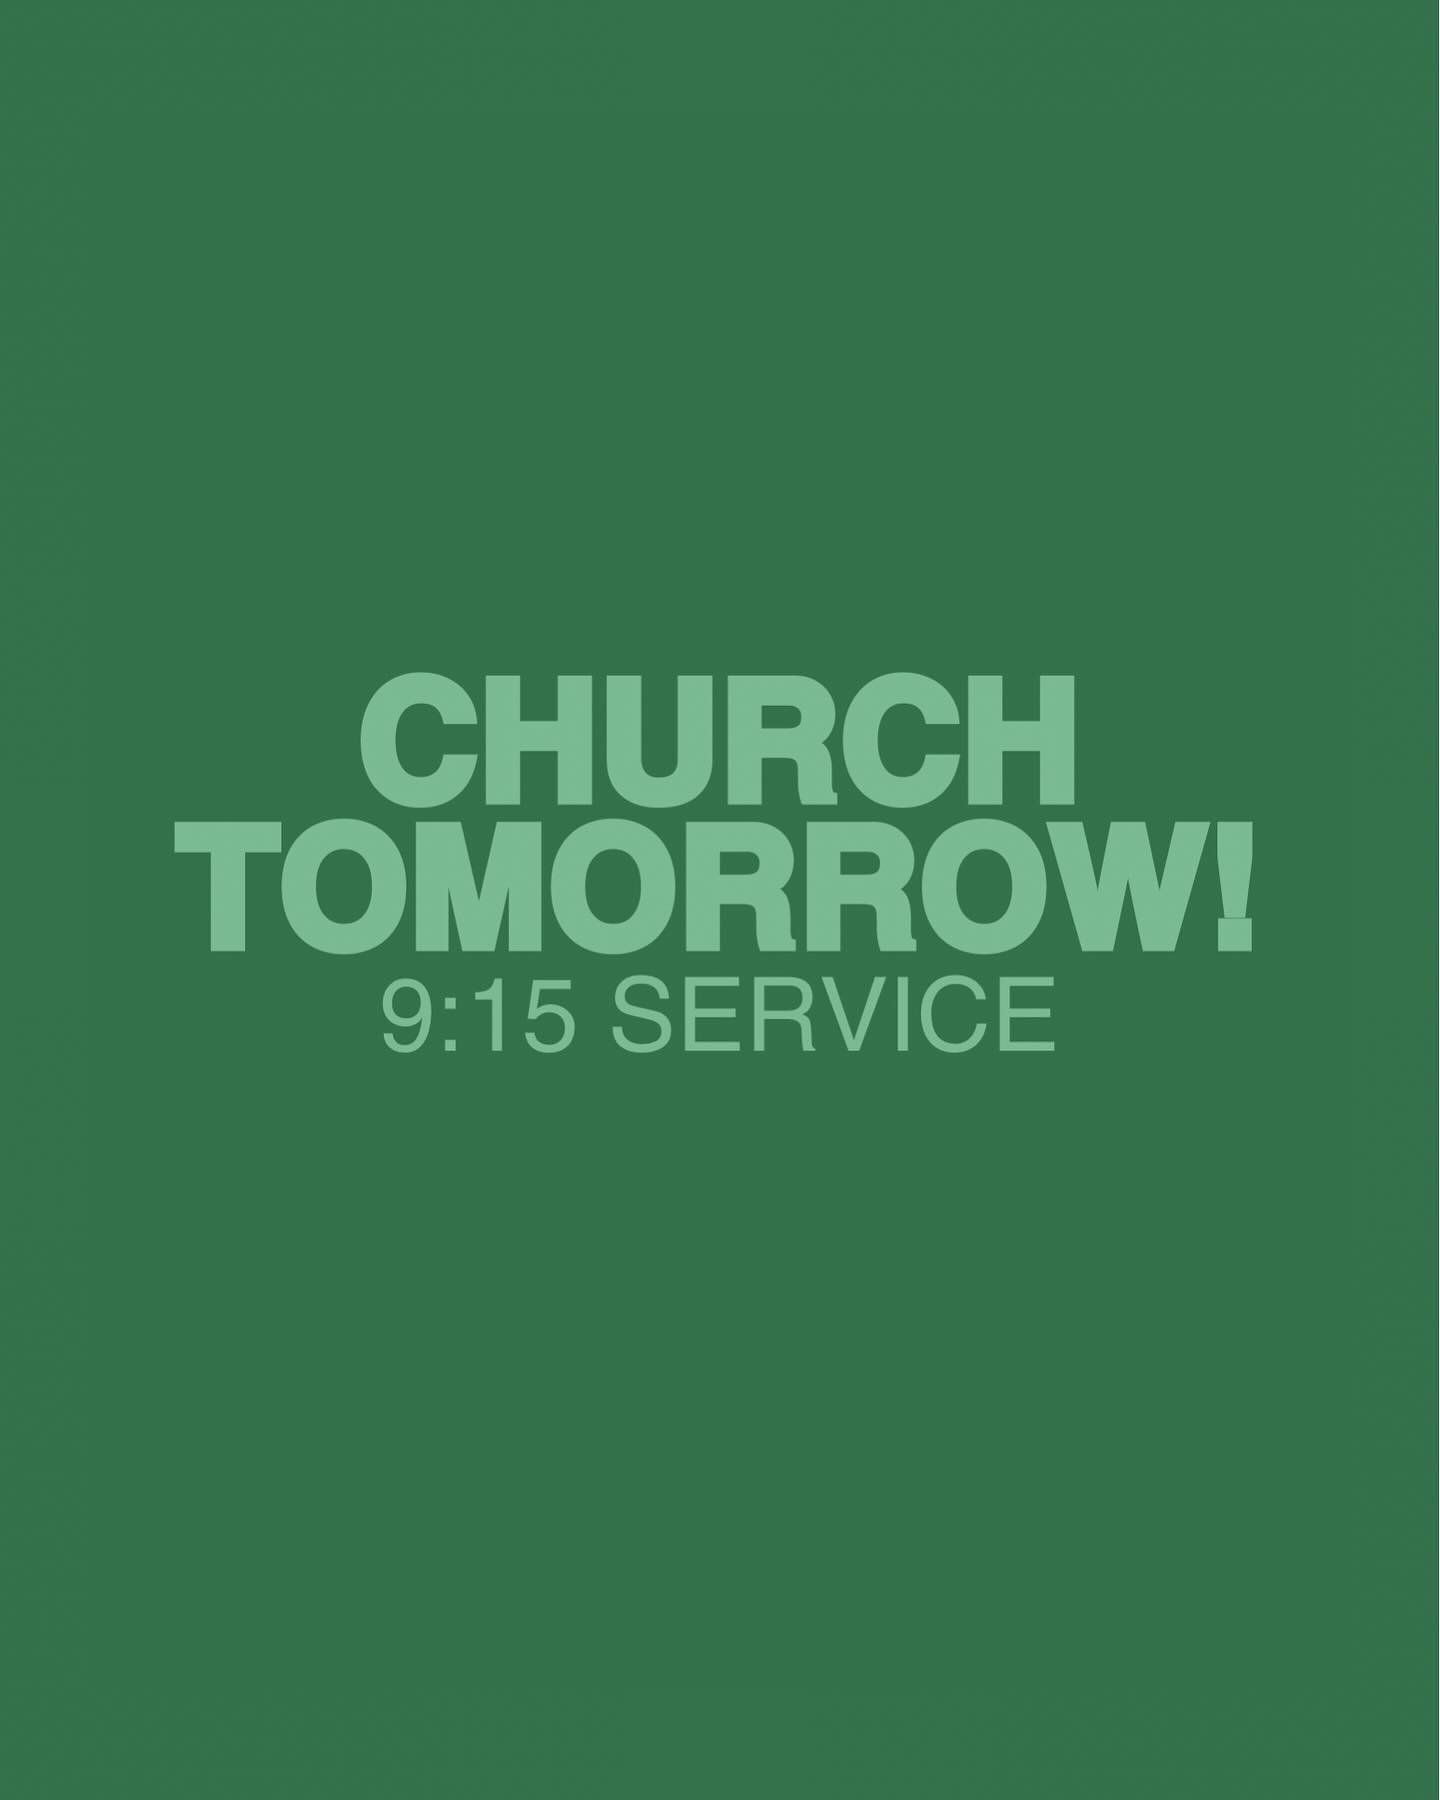 UPDATE! 

We are having a service outside 9:15 ONLY! 

Then let&rsquo;s spread our light to our neighbors in need! Bring your gloves, tools, or just your serving hands - and let&rsquo;s be great neighbors!